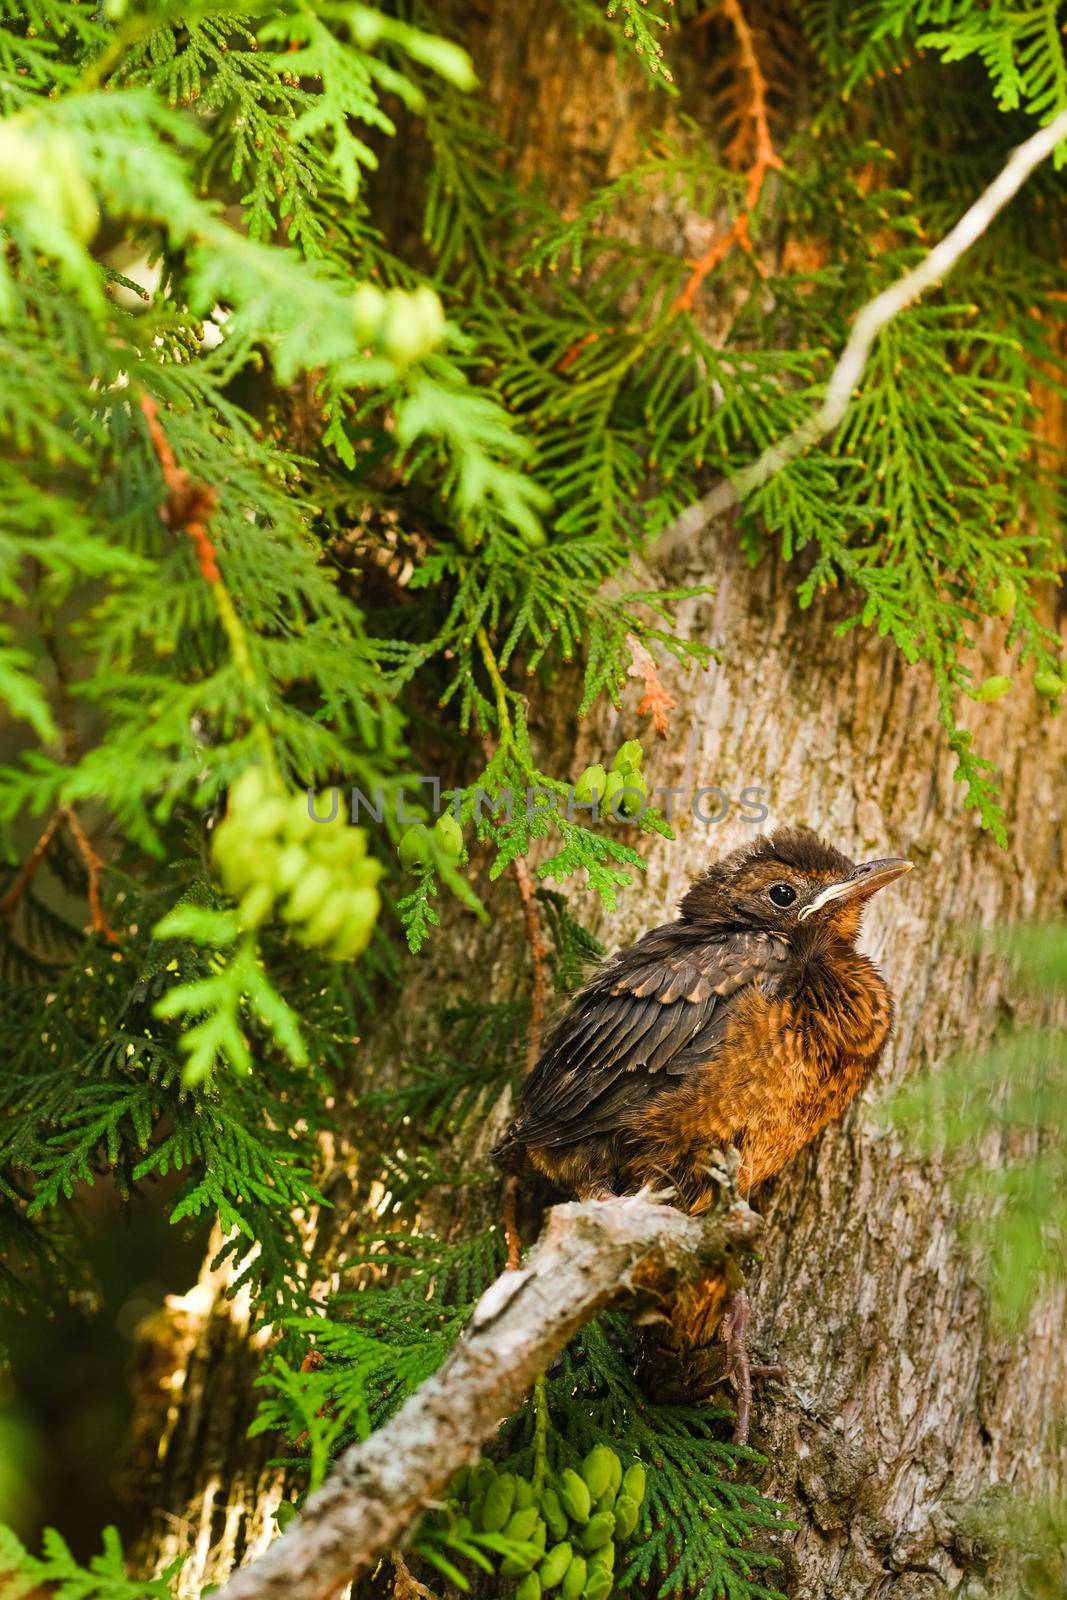 A thrush chick is sitting on a tree branch. The bird is a small blackbird sitting on the tree.